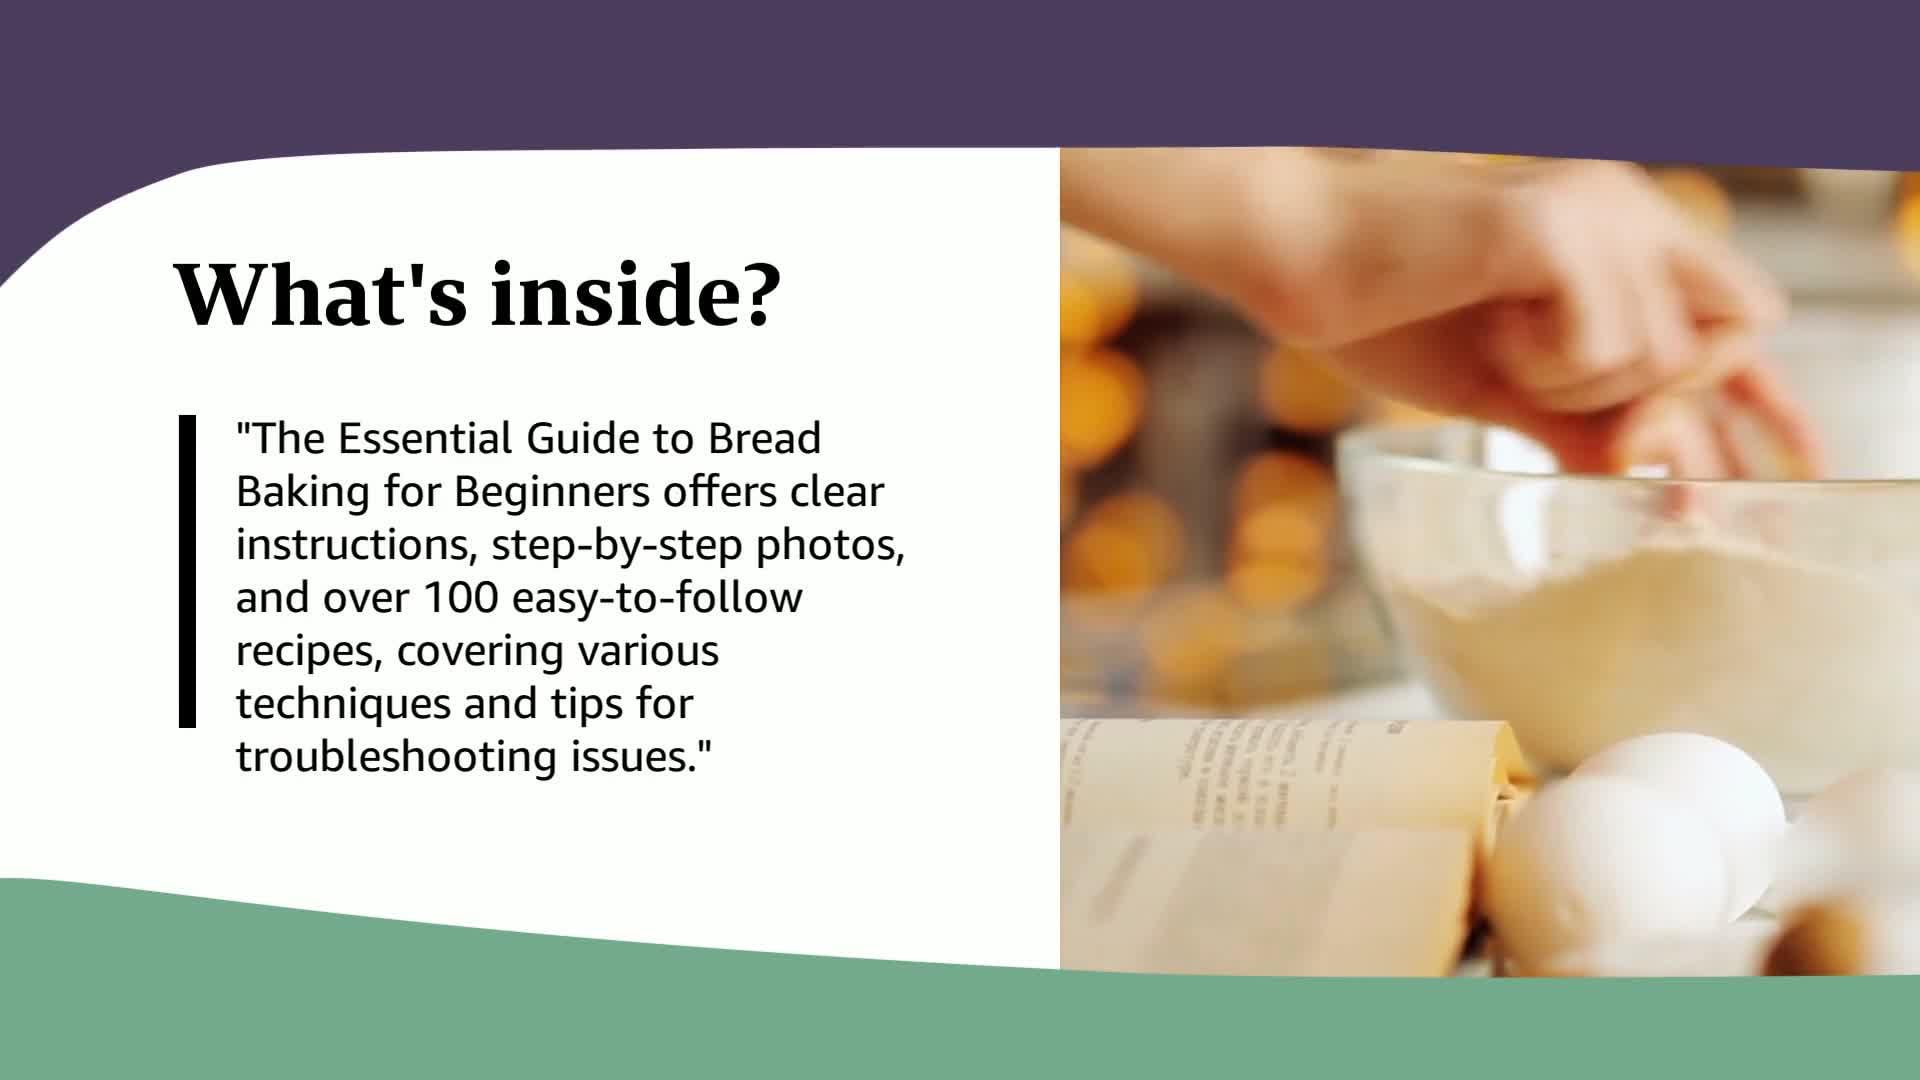 Bread Baking for Beginners: The Essential Guide to Baking Kneaded Breads, No-Knead Breads, and Enriched Breads